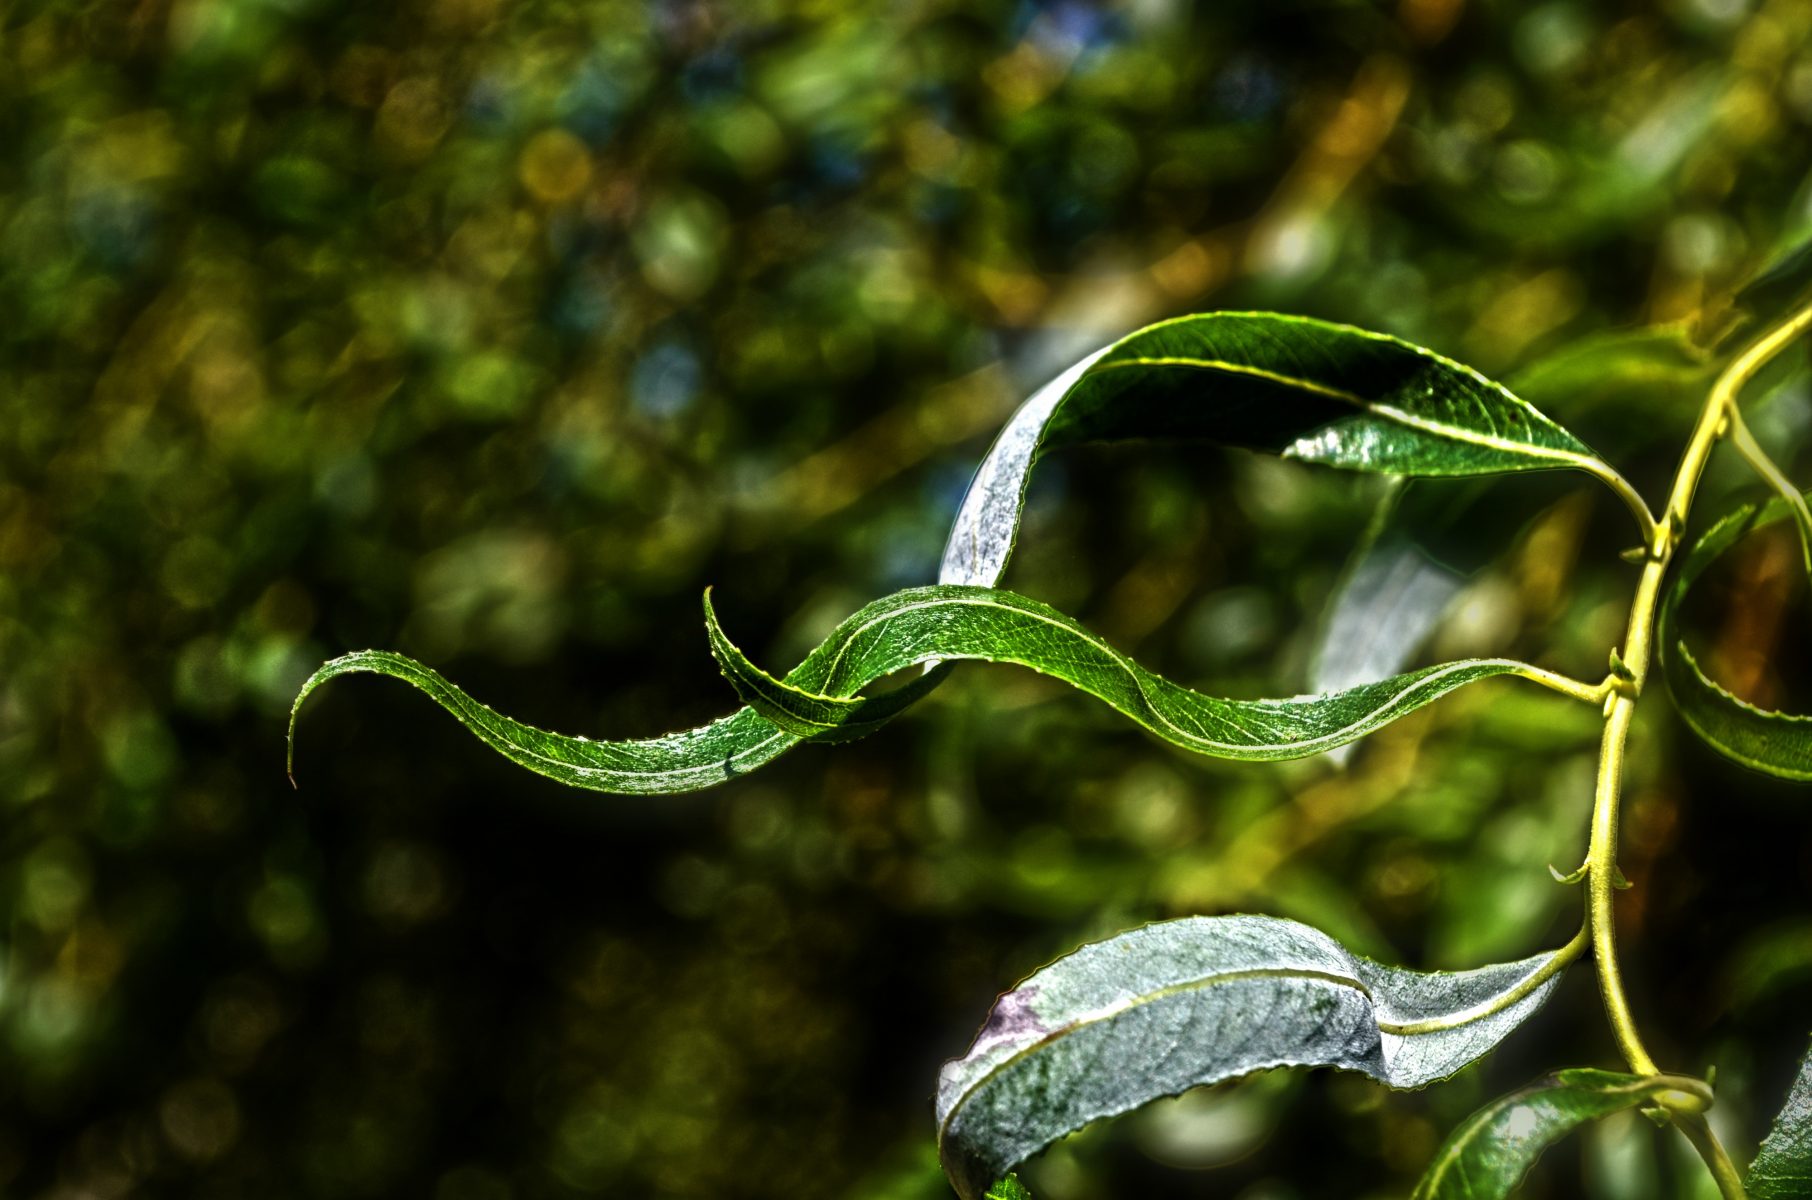 https://pixabay.com/photos/nature-tree-willow-leaves-922625/